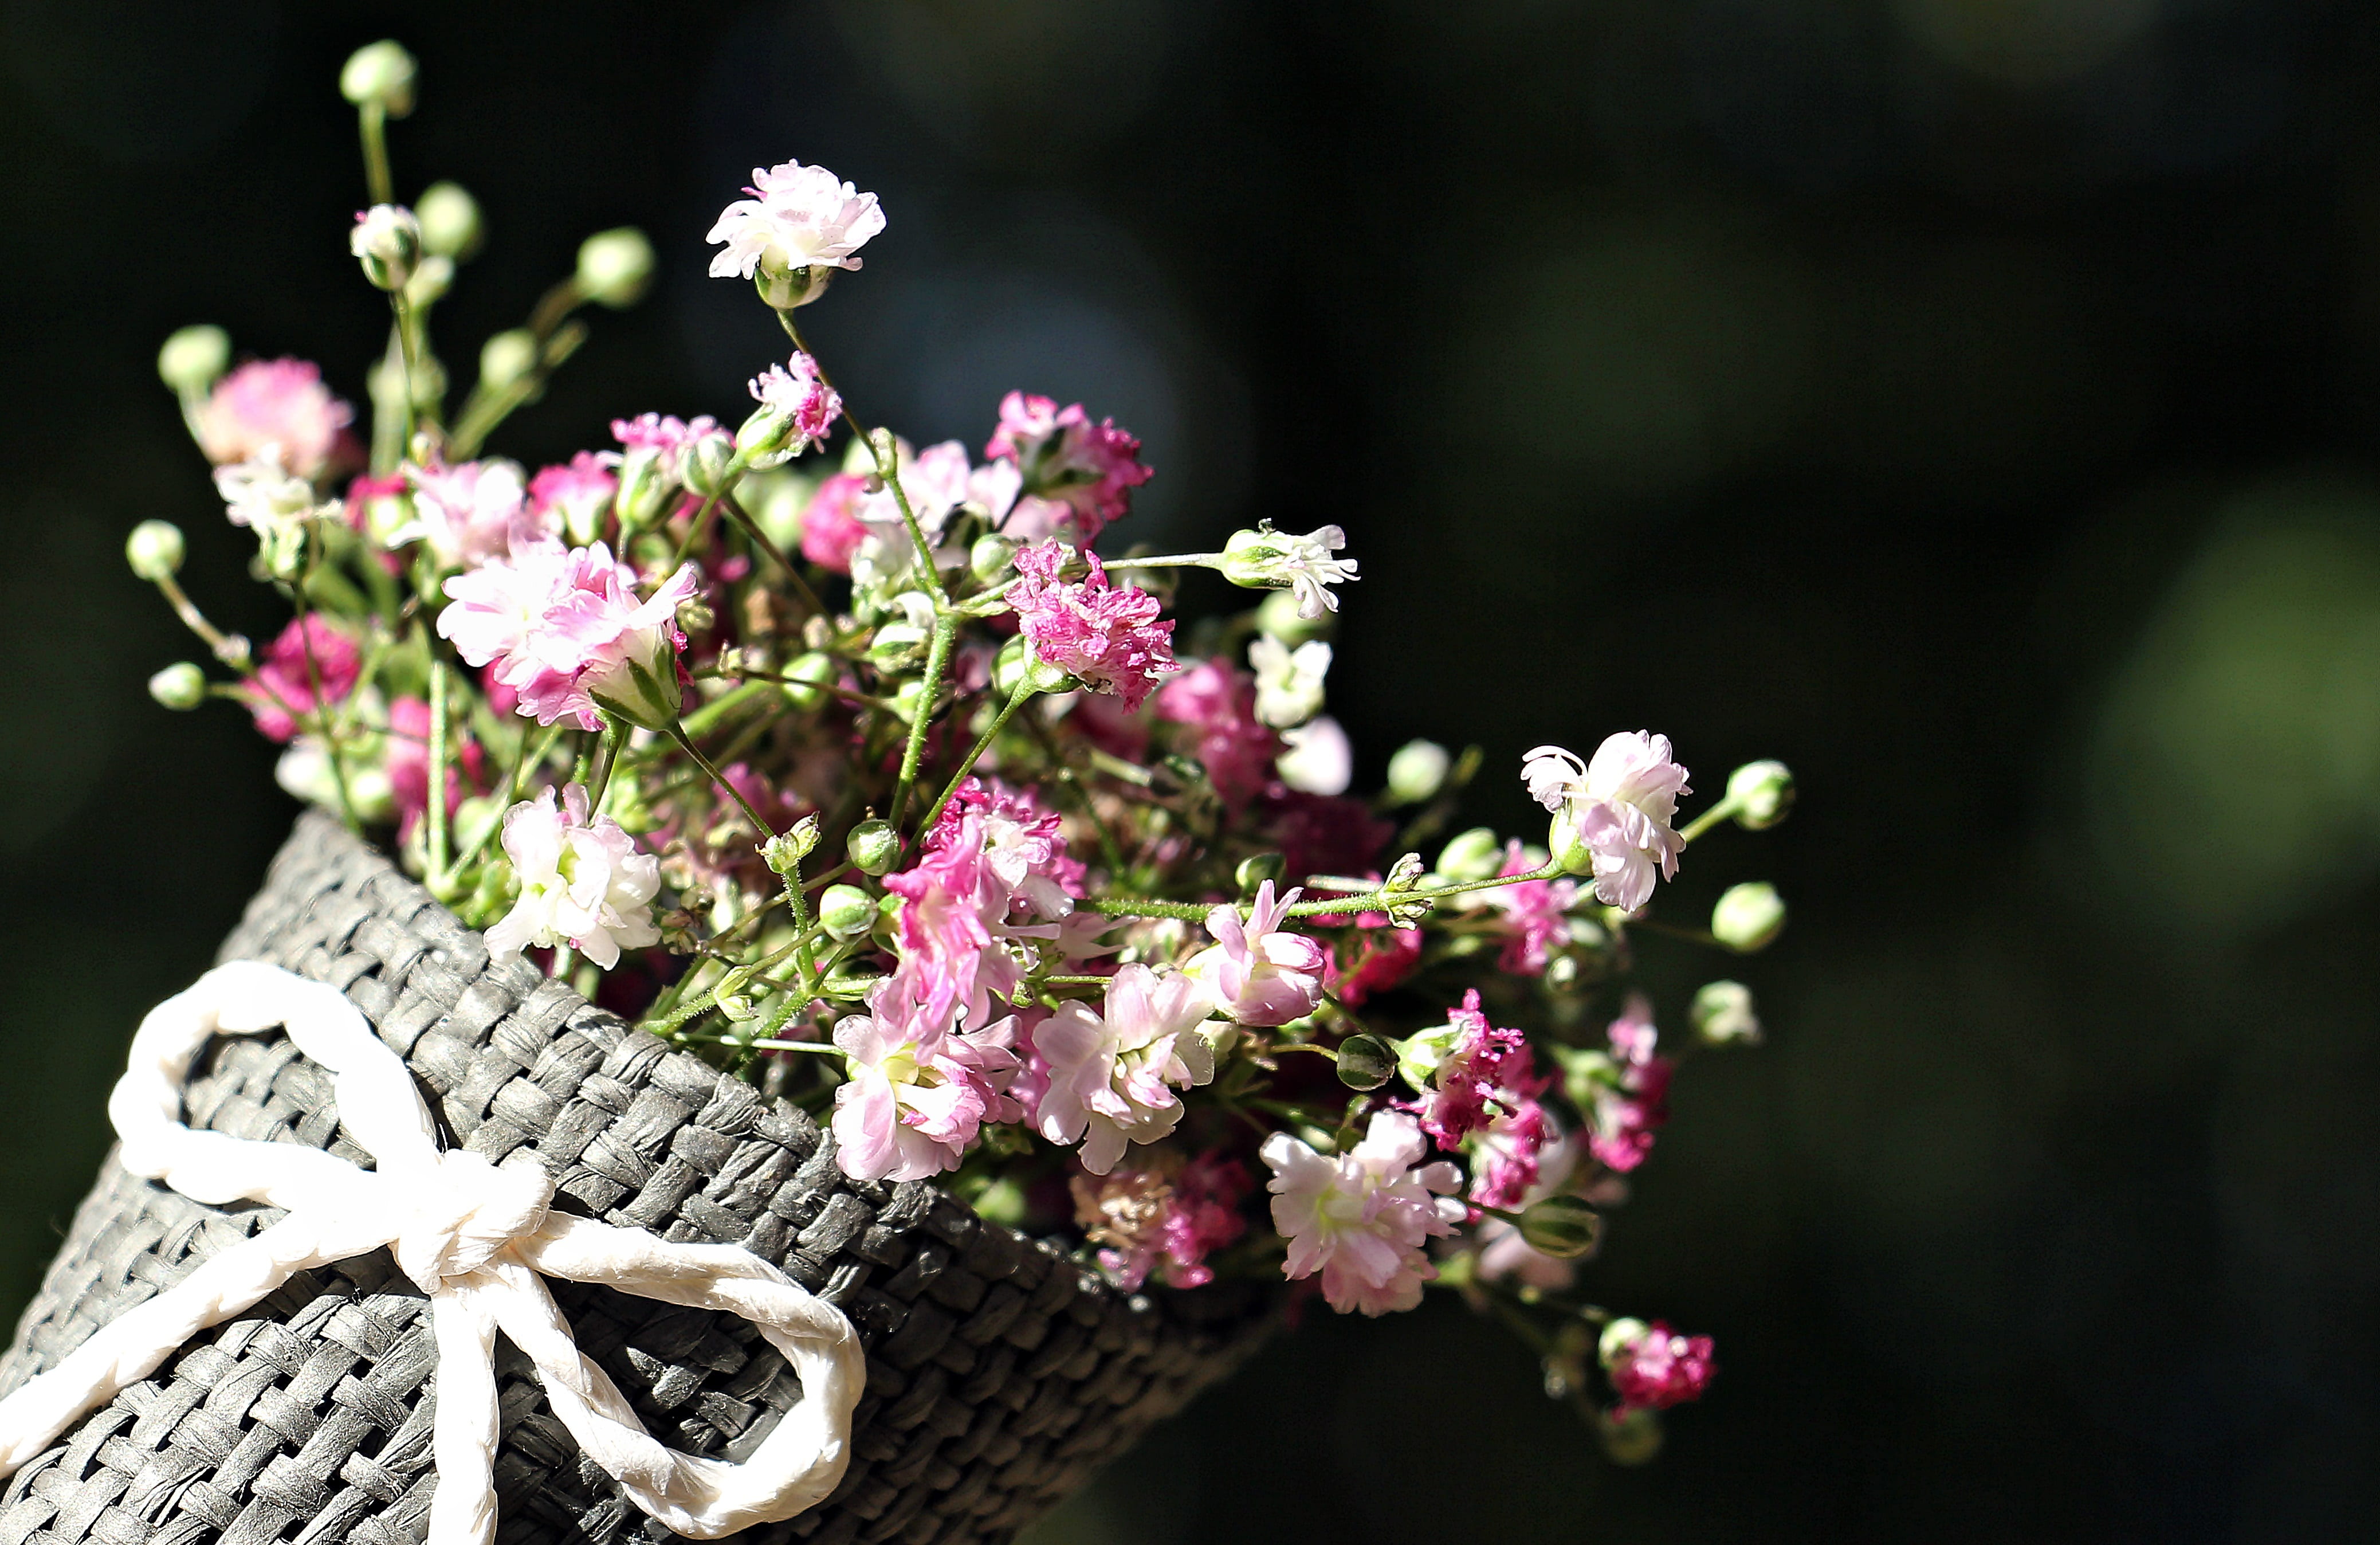 pink and white flowers on bouquet during daytime, bag gypsofilia seeds